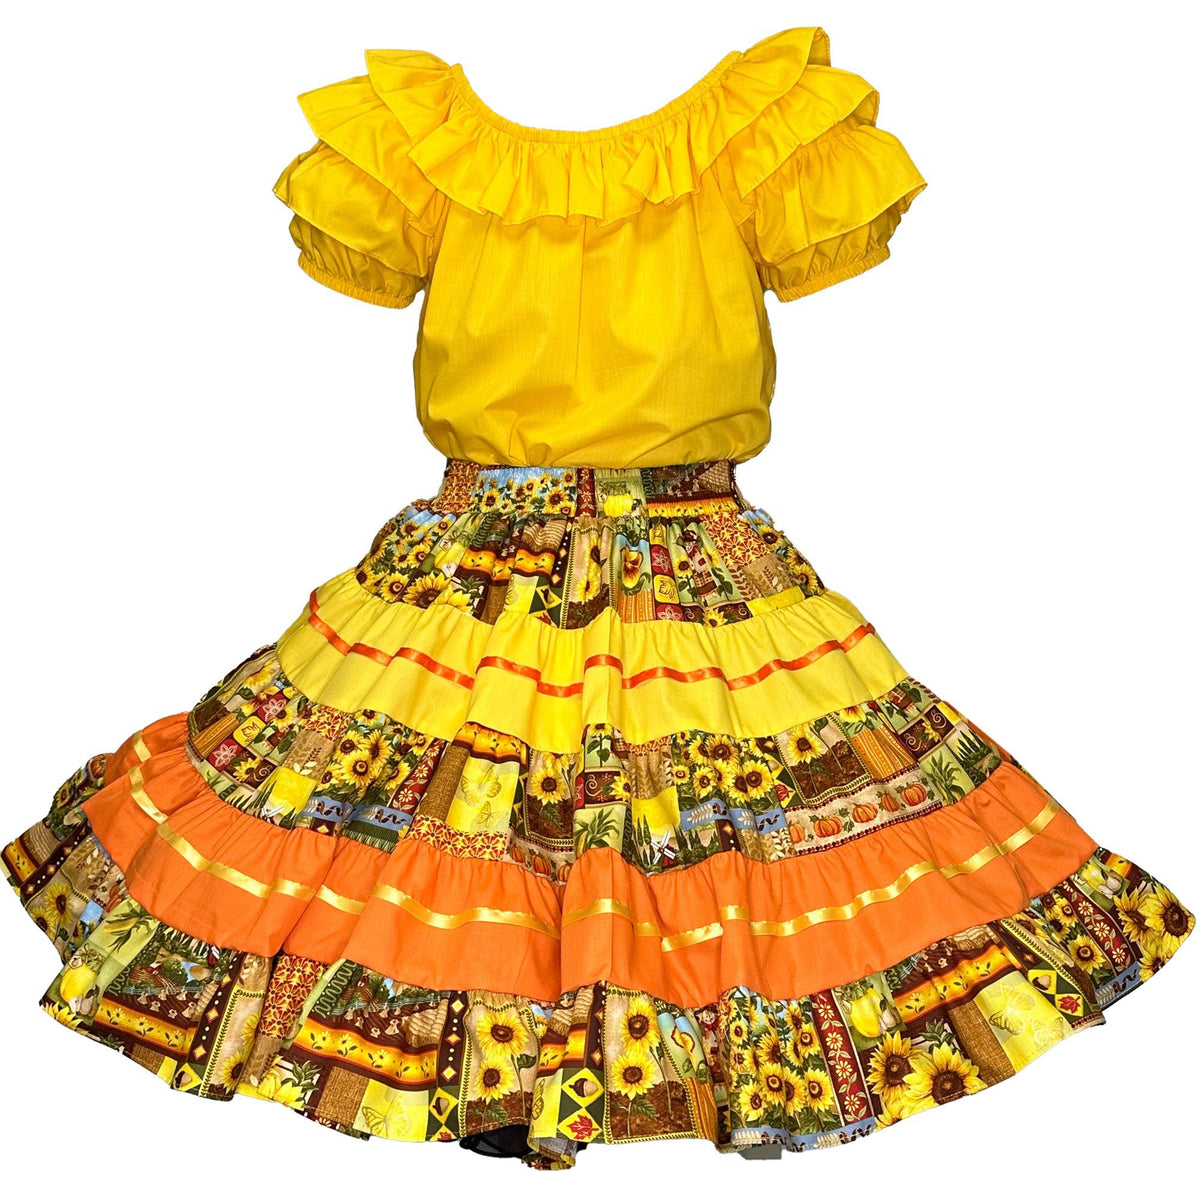 A Golden Harvest Fall Outfit dress with sunflowers on it, perfect for autumn from Square Up Fashions.